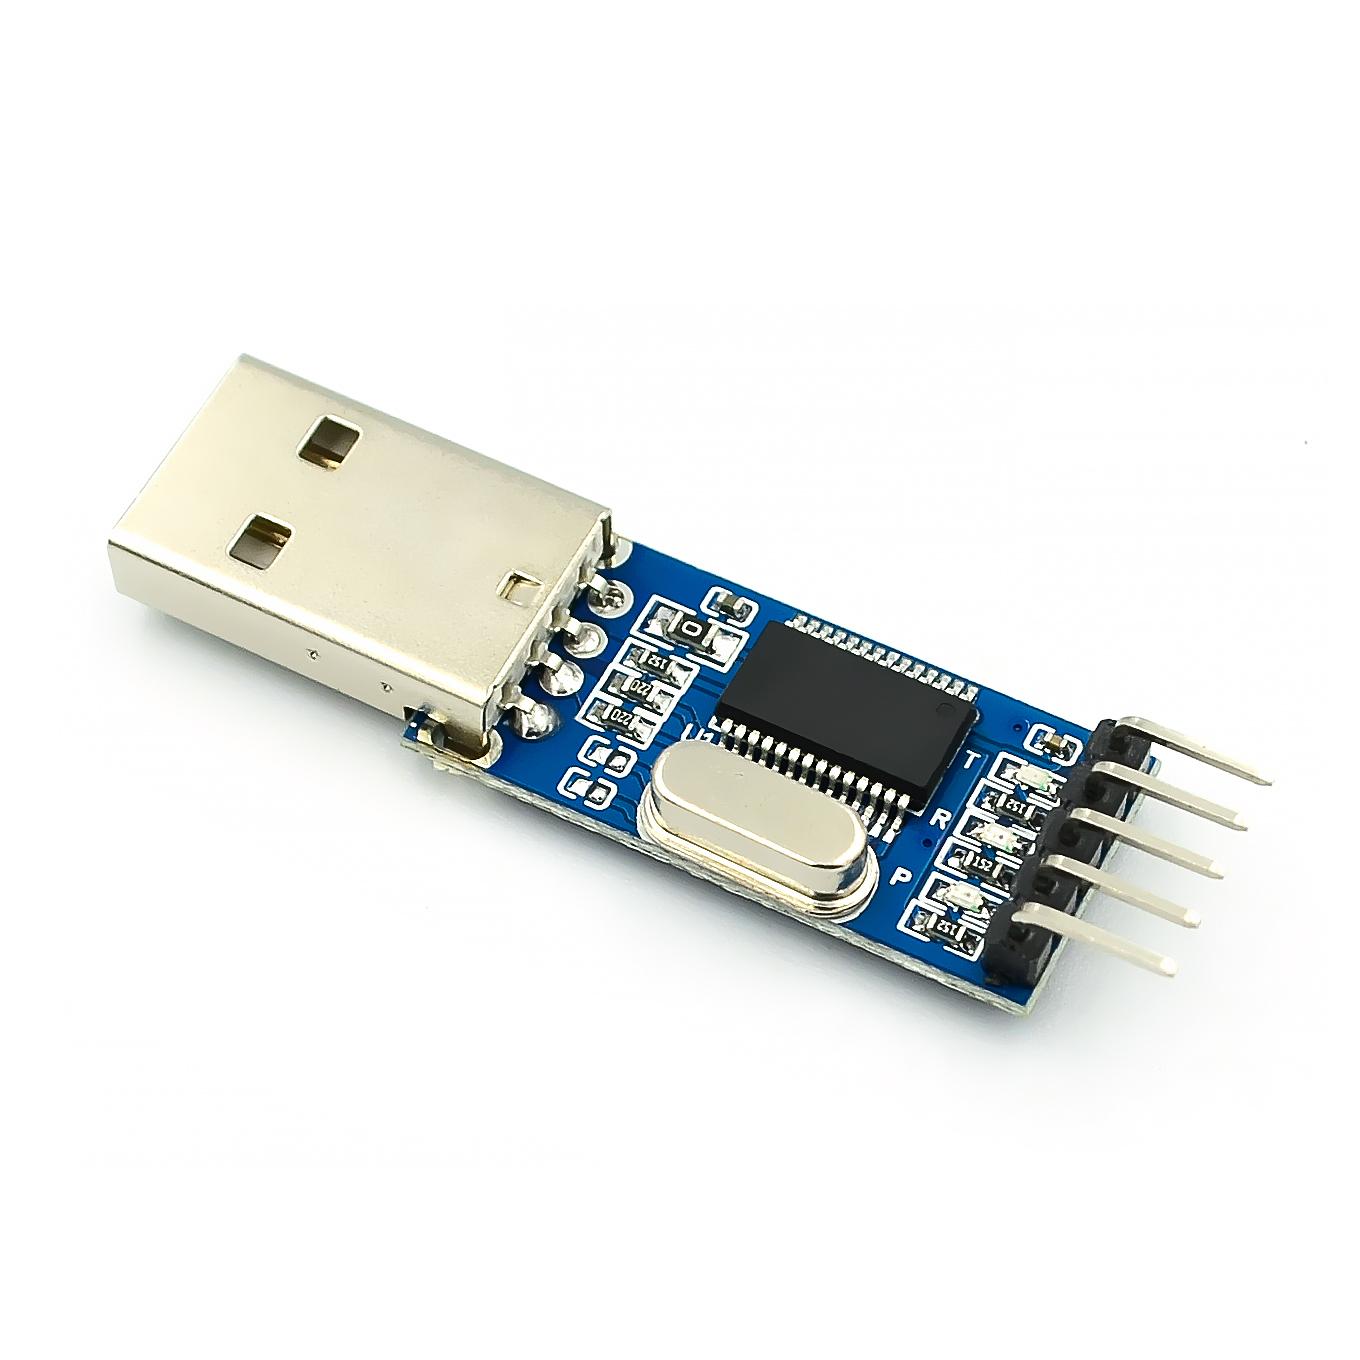 PL2303 USB To RS232 TTL Converter Adapter Module with Dust-Proof Cover PL2303HX